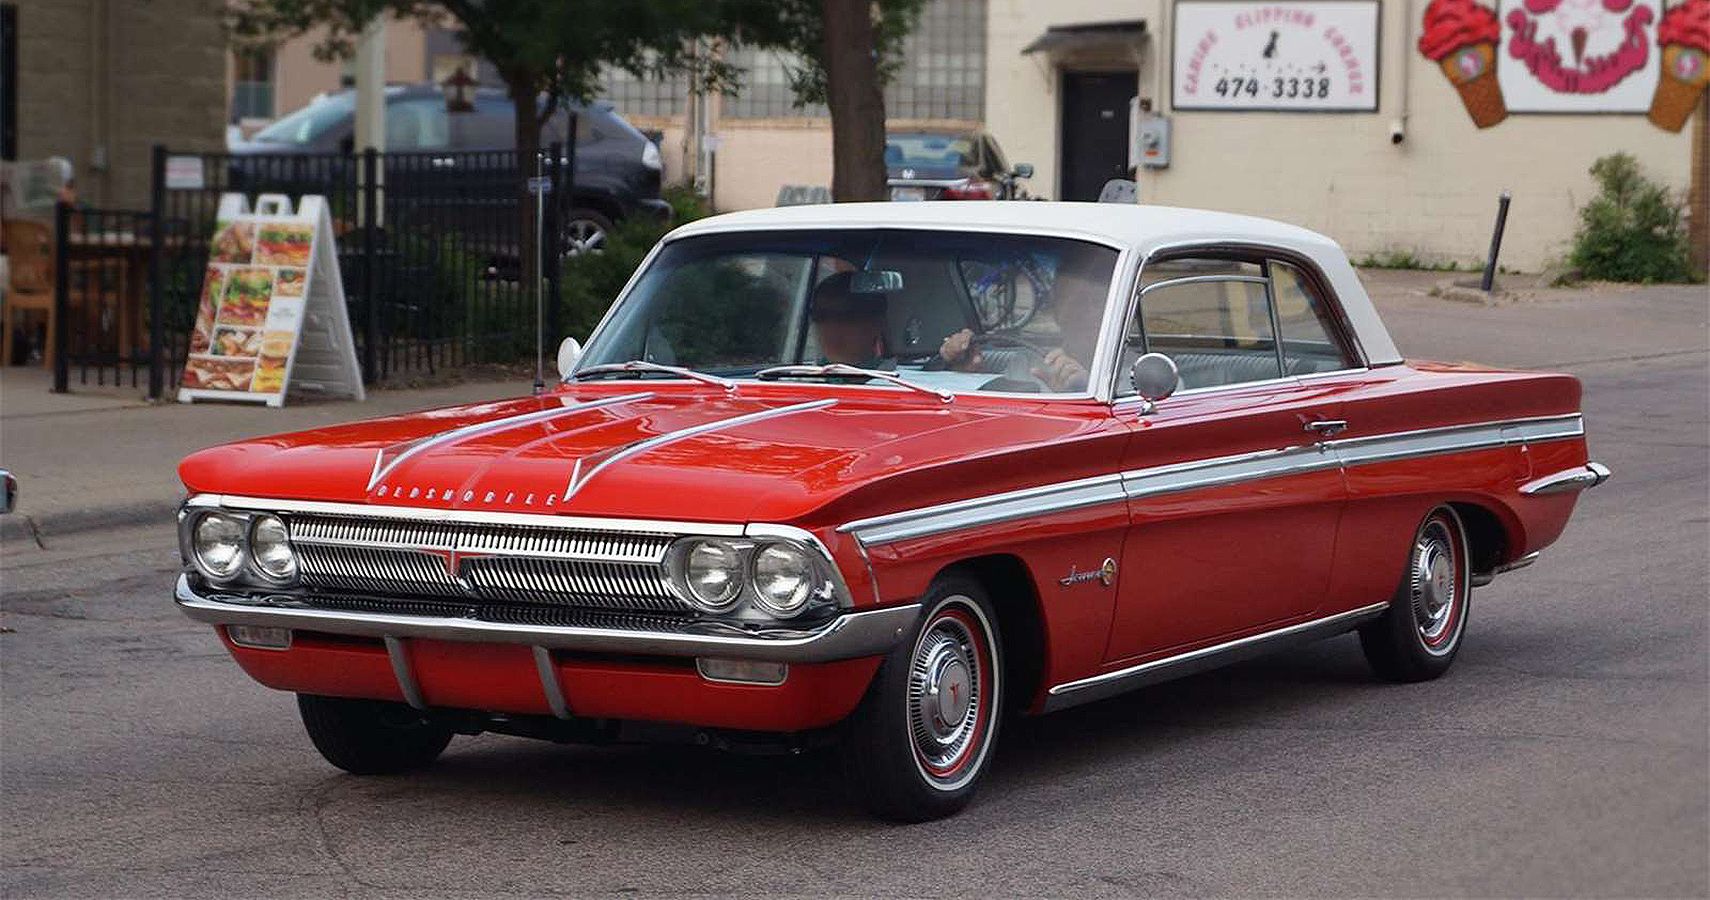 The Good Olds: 1962 Oldsmobile Jetfire, The First Turbocharger